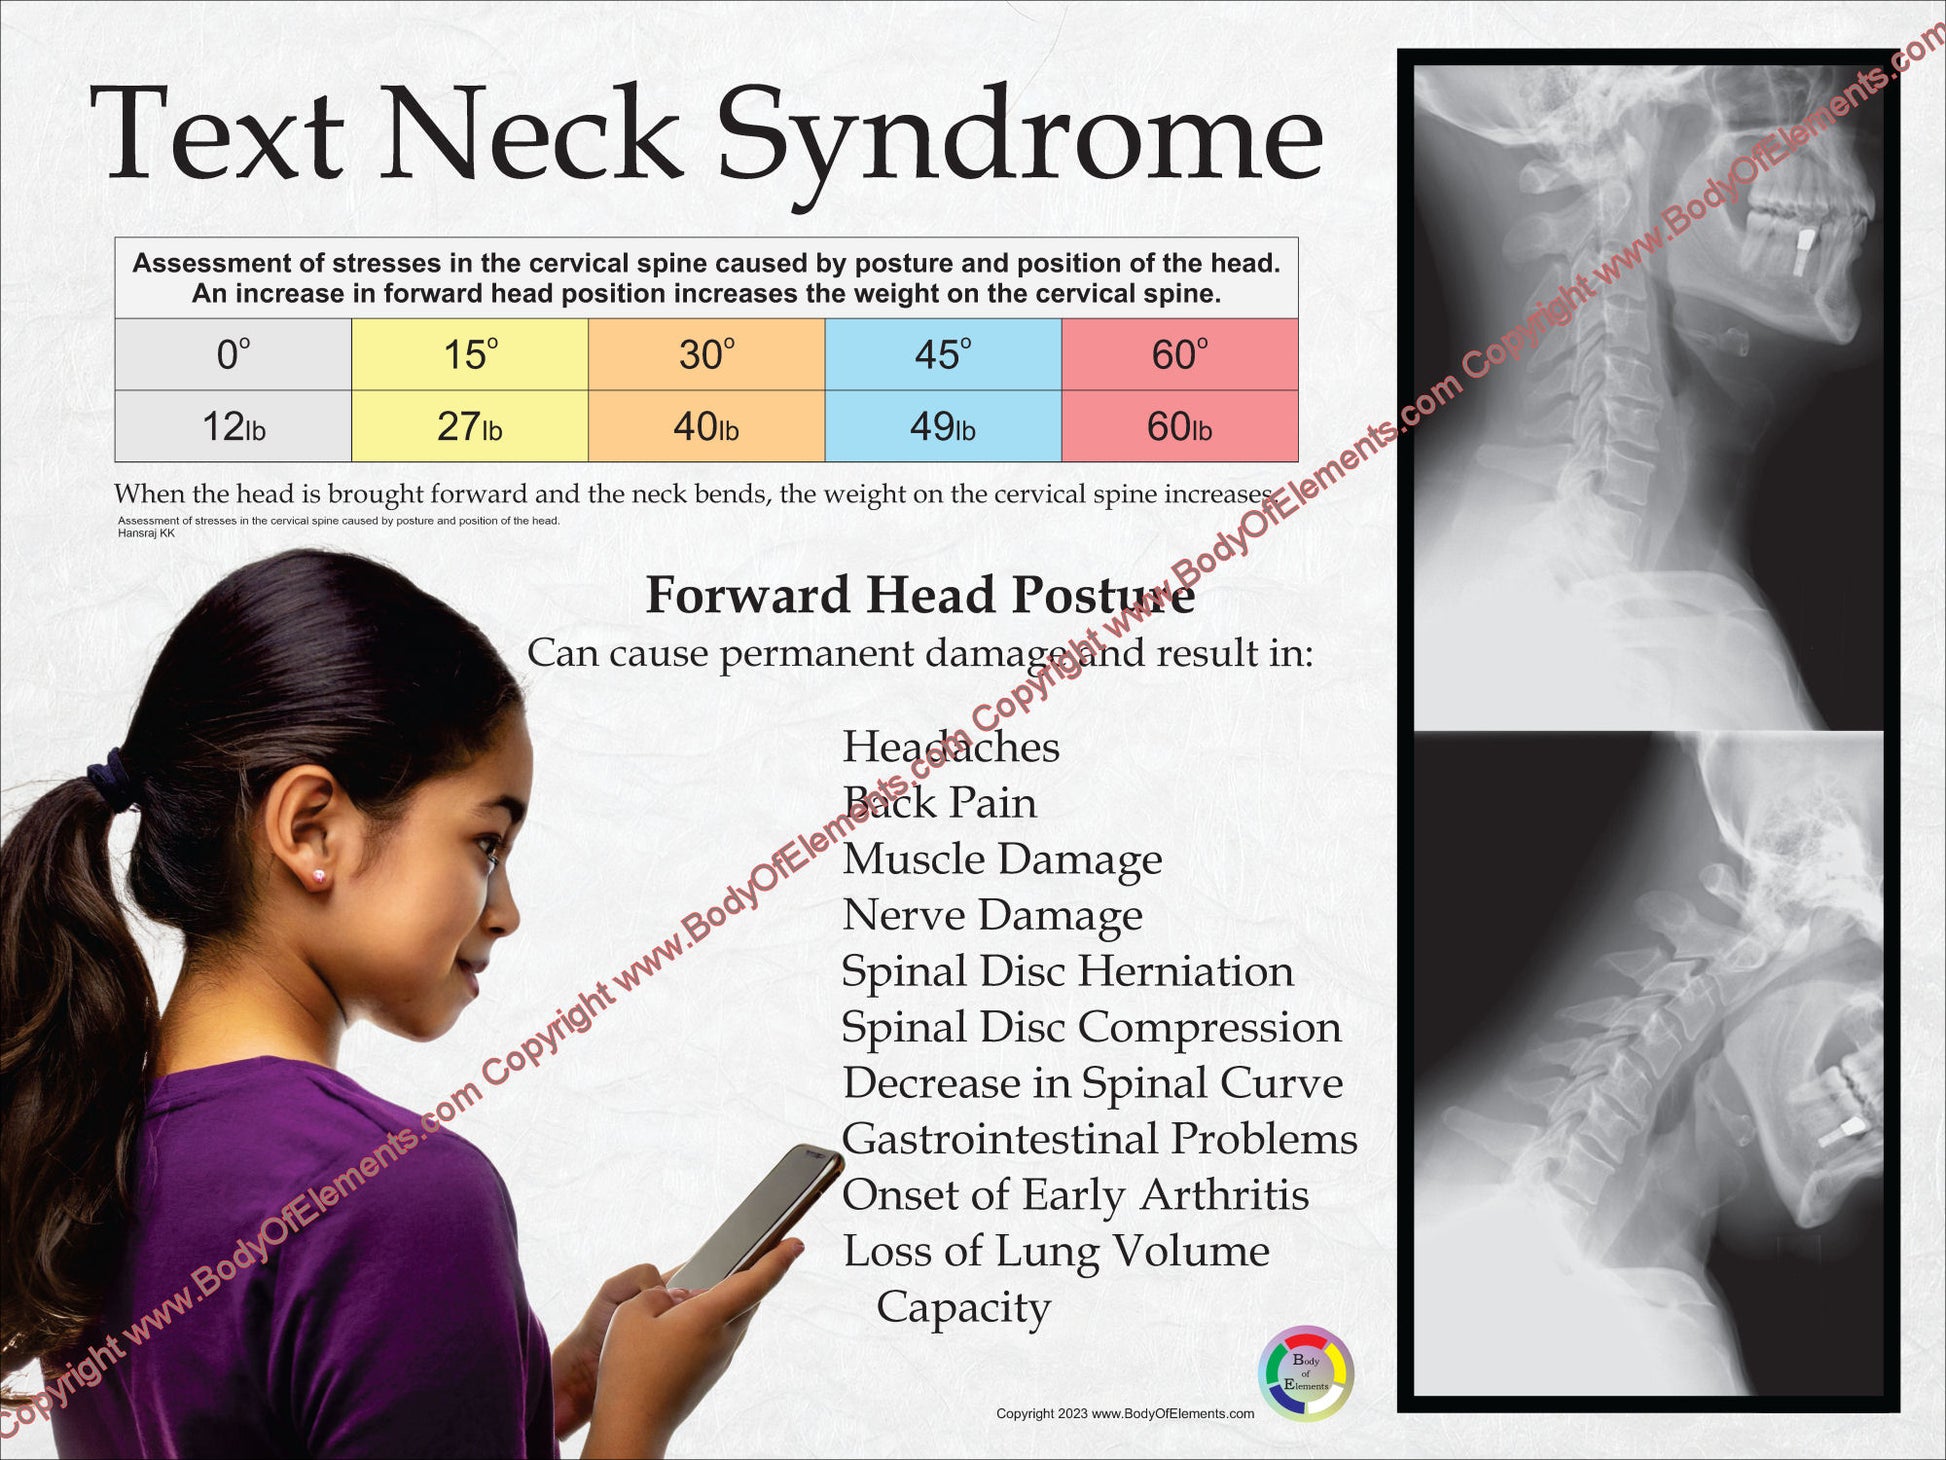 Pain from forward head position texting poster.